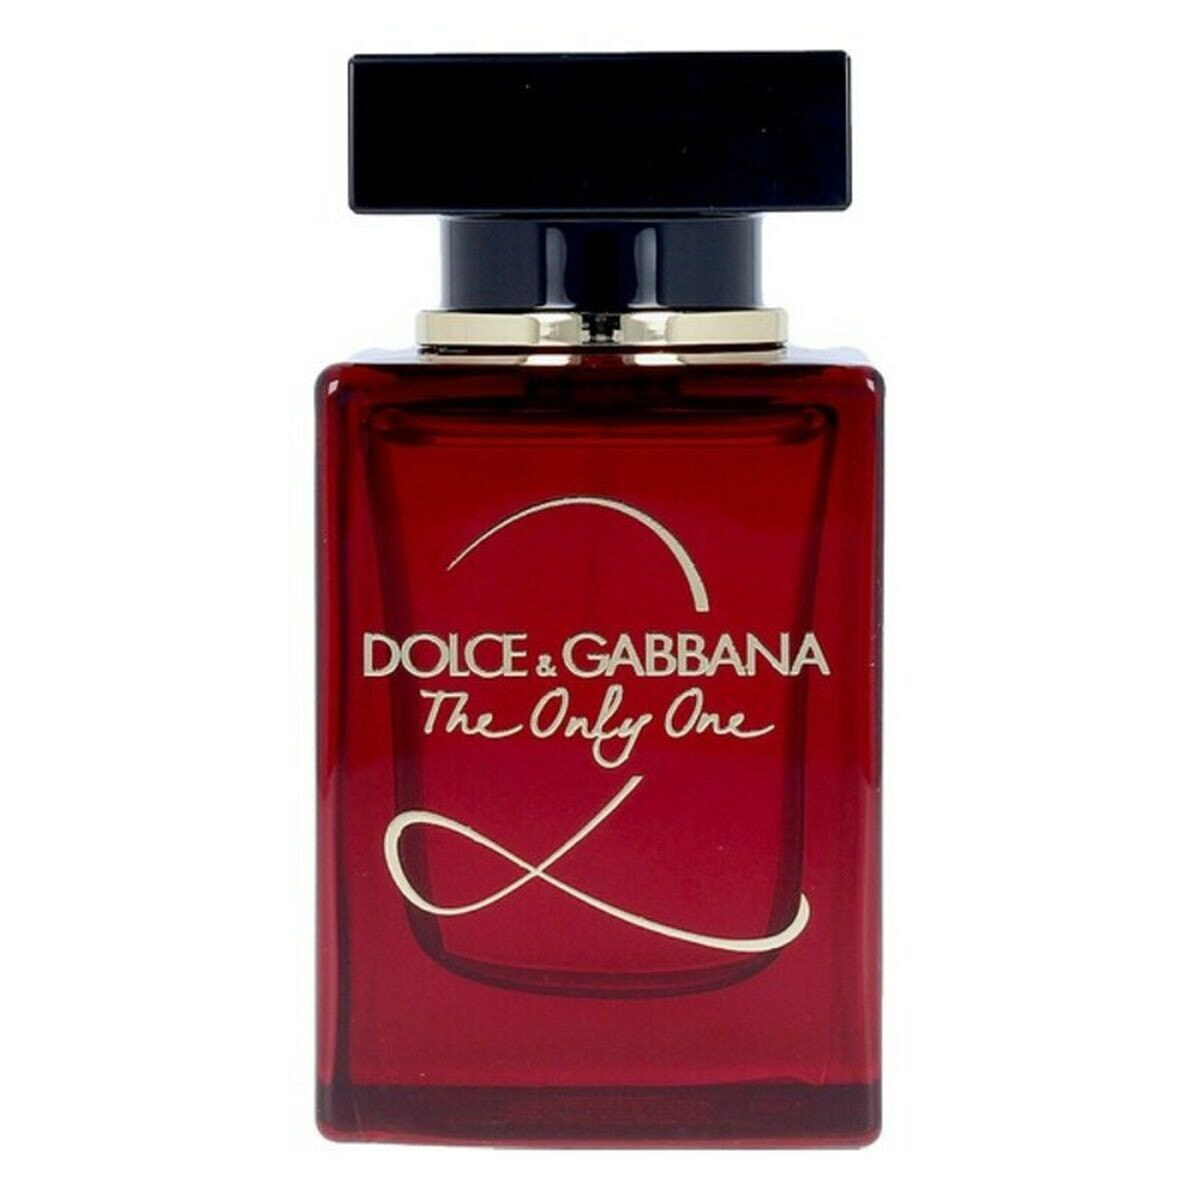 Духи дольче габбана онли. Dolce Gabbana the only one 2 100 мл. Духи Дольче Габбана the only one 100 мл. Дольче Габбана the only 50 мл. Dolce & Gabbana the only one EDP 50 ml.